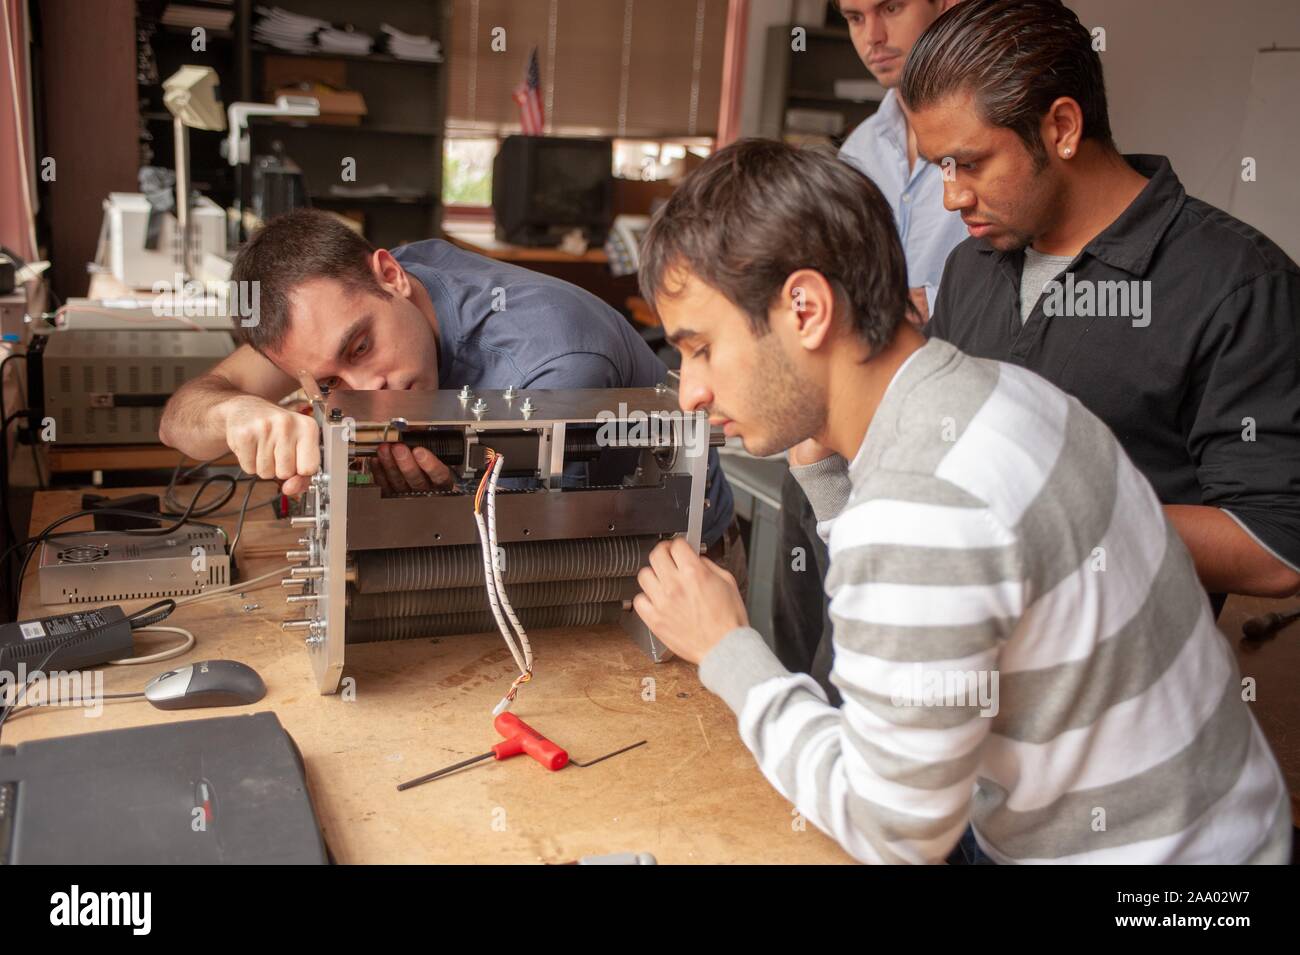 Four Whiting School of Engineering Design Team students work on a component in a machine shop at the Johns Hopkins University, Baltimore, Maryland, March 30, 2009. From the Homewood Photography Collection. () Stock Photo